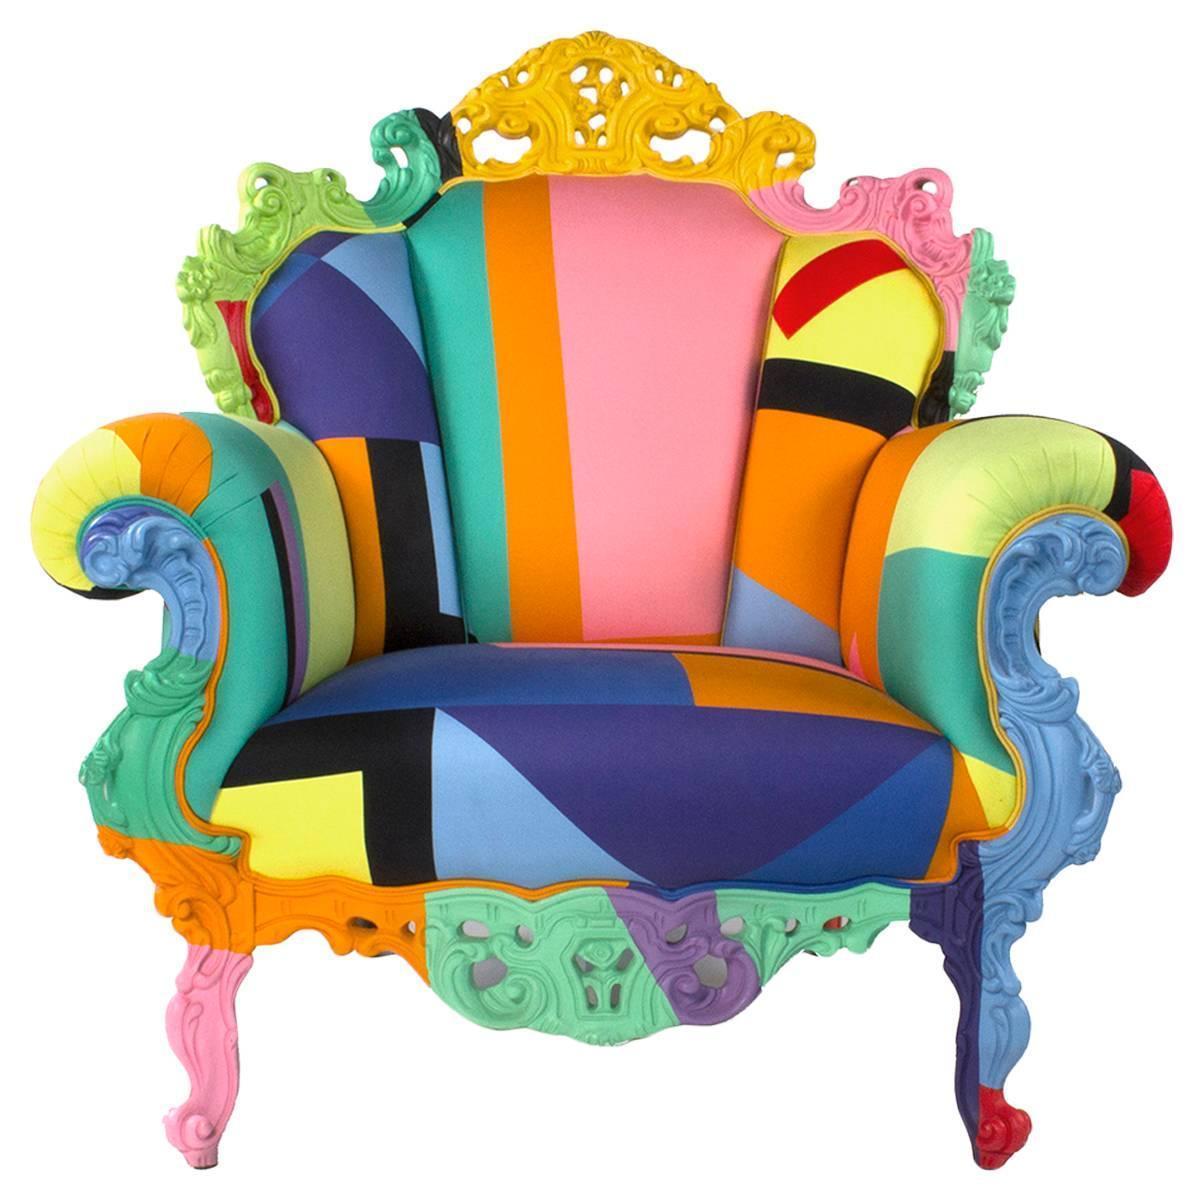 Proust armchair with hand-carved wooden frame by Alessandro Mendini for Cappellini. 

Armchair with wooden frame, upholstered with a new multi-color fabric designed by Alessandro Mendini. Created in 1978 for the Palazzo dei Diamanti in Ferrara,